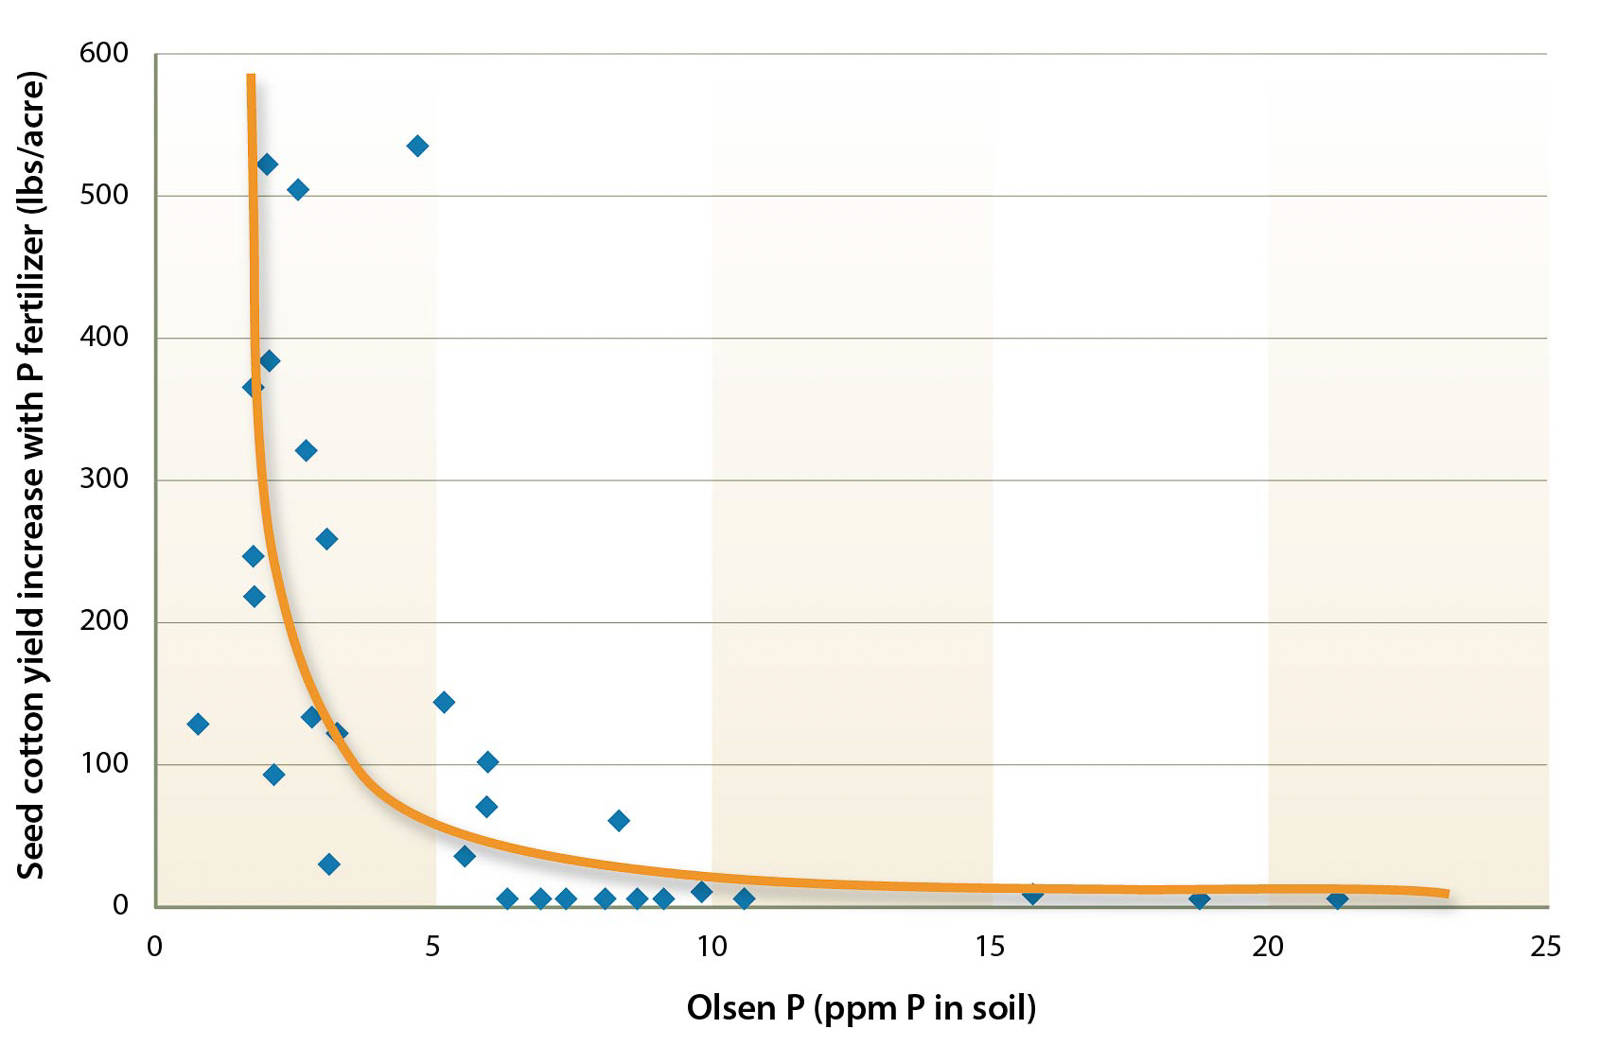 Example of a field calibration of the Olsen P test for cotton conducted in the San Joaquin Valley. Each dot represents one field trial. The study concluded that a response to P fertilization is likely when the Olsen P value is below 5.2 parts per million (ppm) and unlikely when the value exceeds 7.8 ppm (redrawn from Mikkelsen 1955).